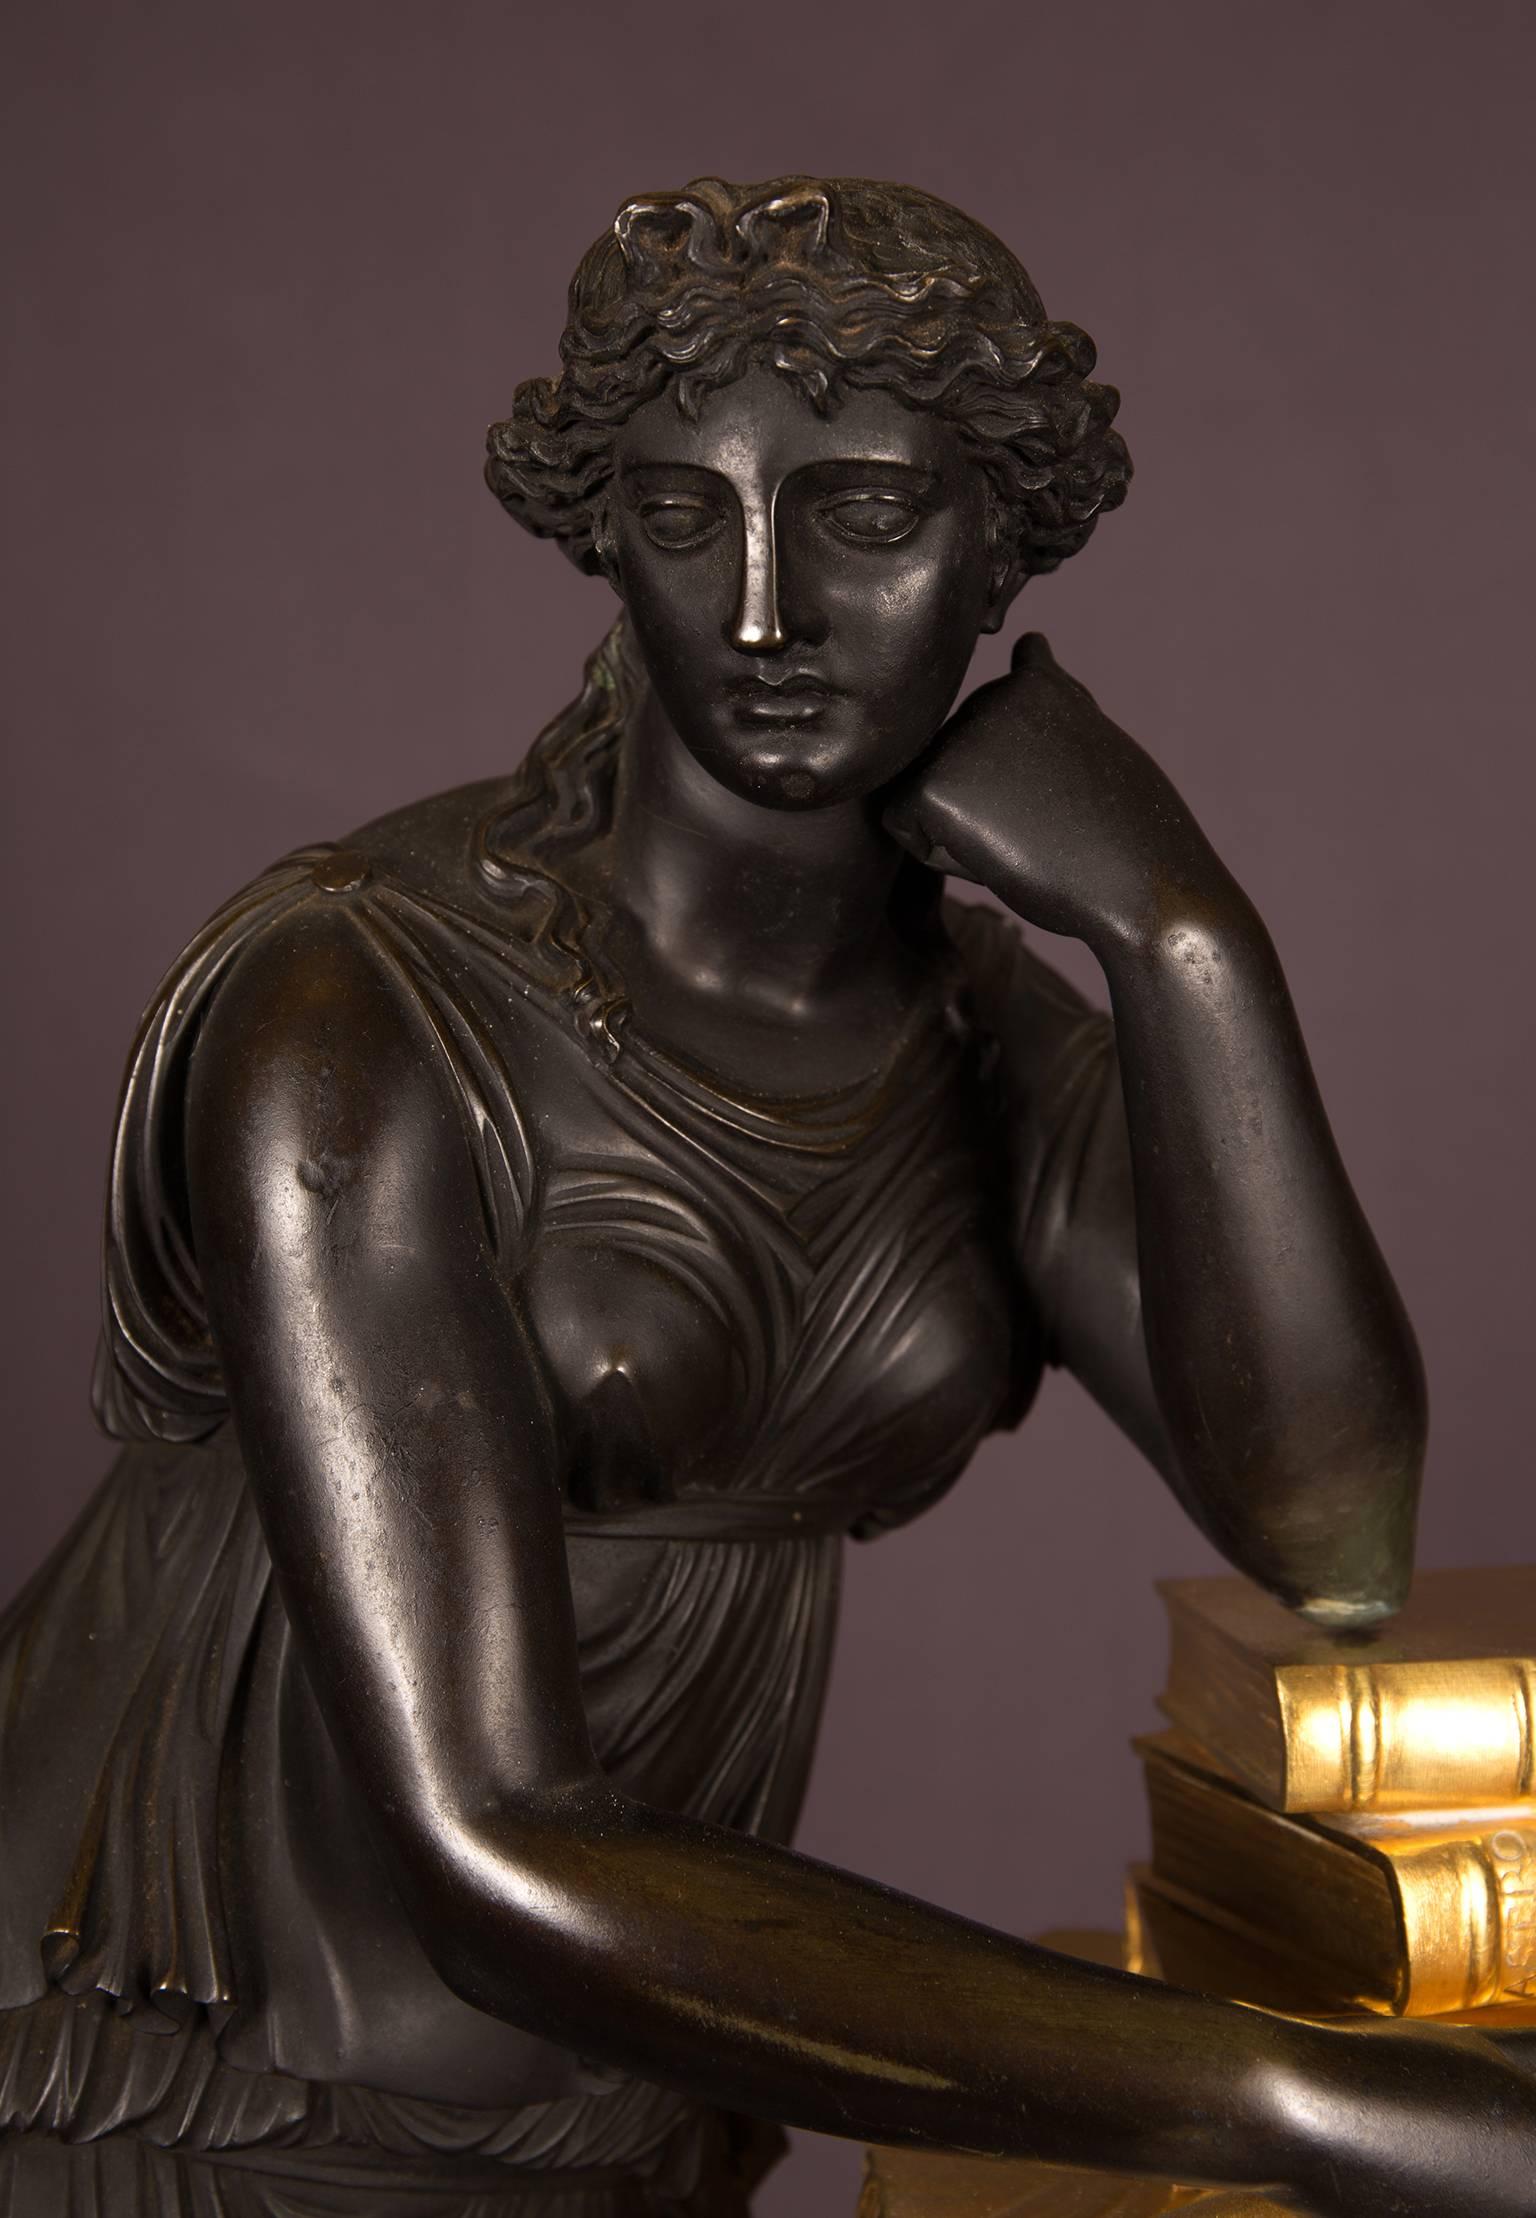 Empire period mantel clock representing the figure of Study, France, circa 1815. Possibly after a model by the French bronzier Pierre Victor Ledure. A classical female figure, symbolising Study, leans on books by Aristoteles and Homerus. A gilt